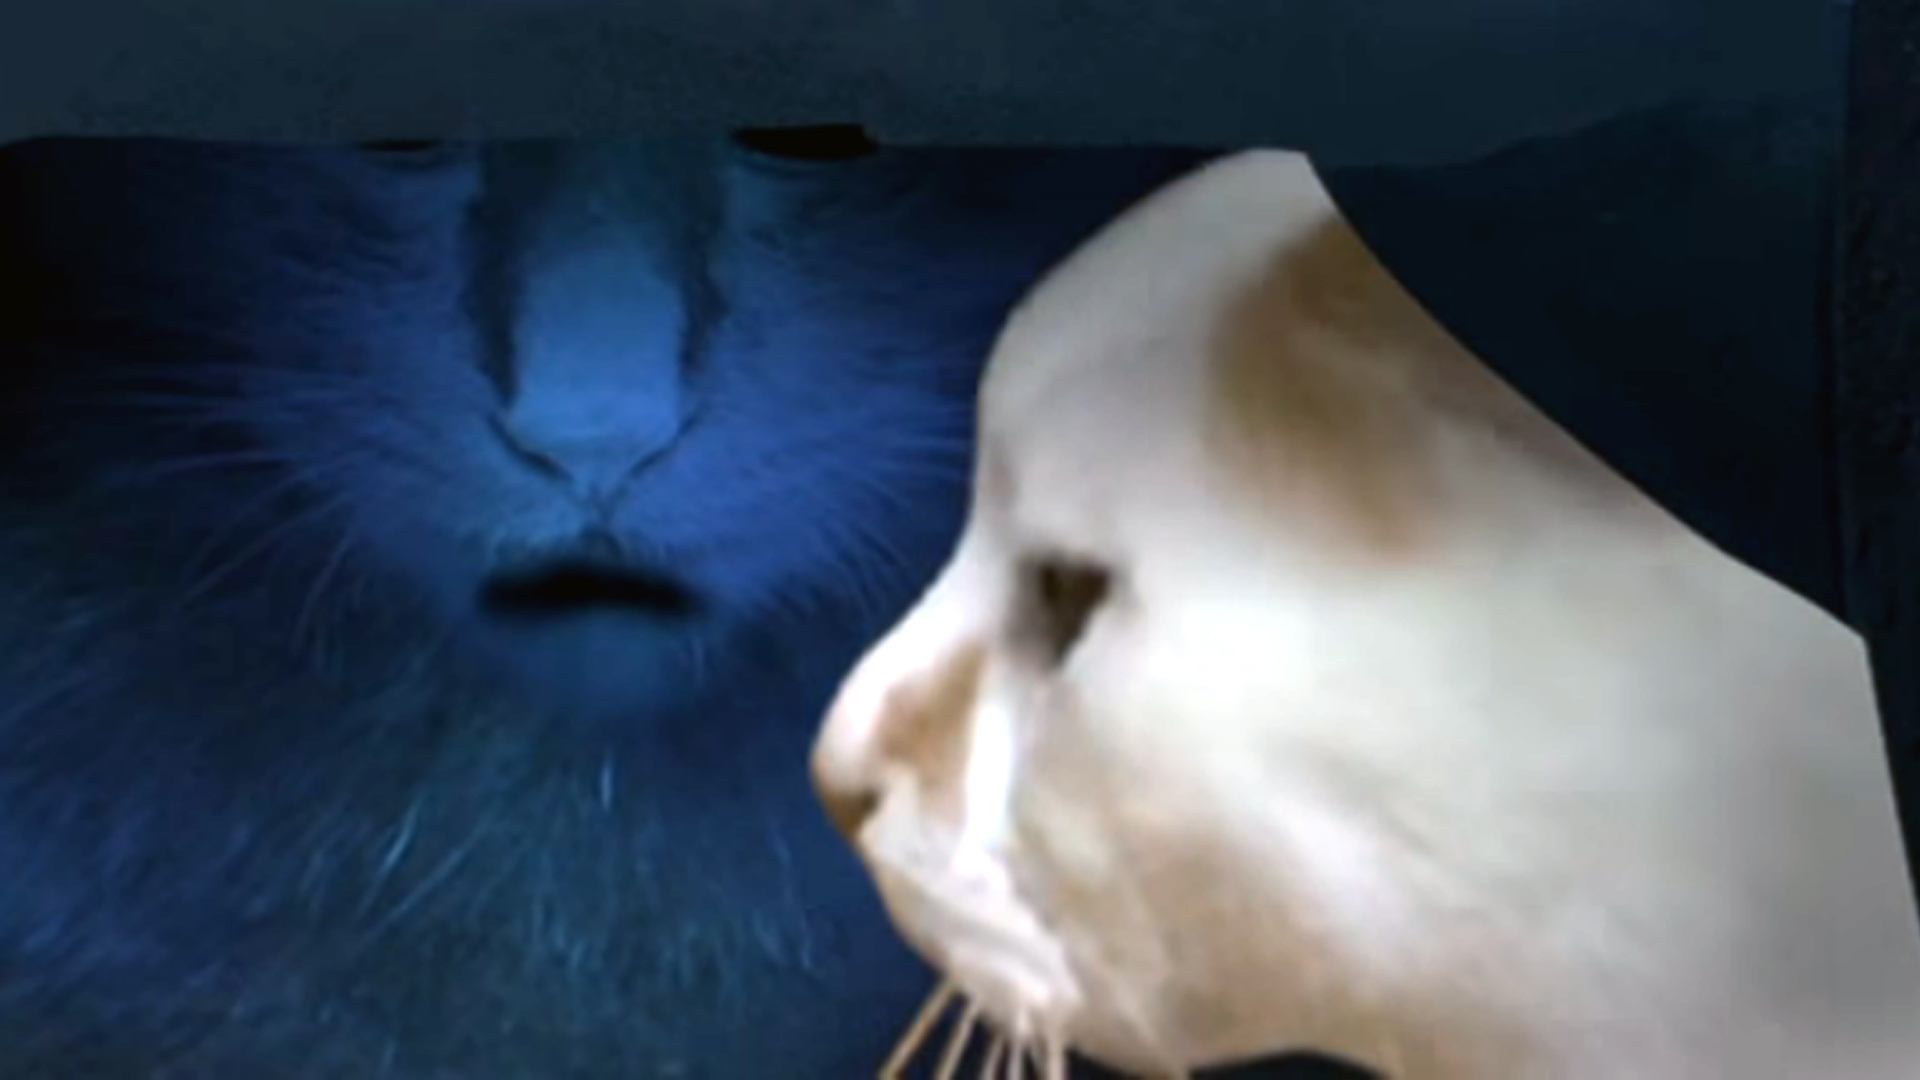 J-horror Tsugunohi features The Grudge for cats